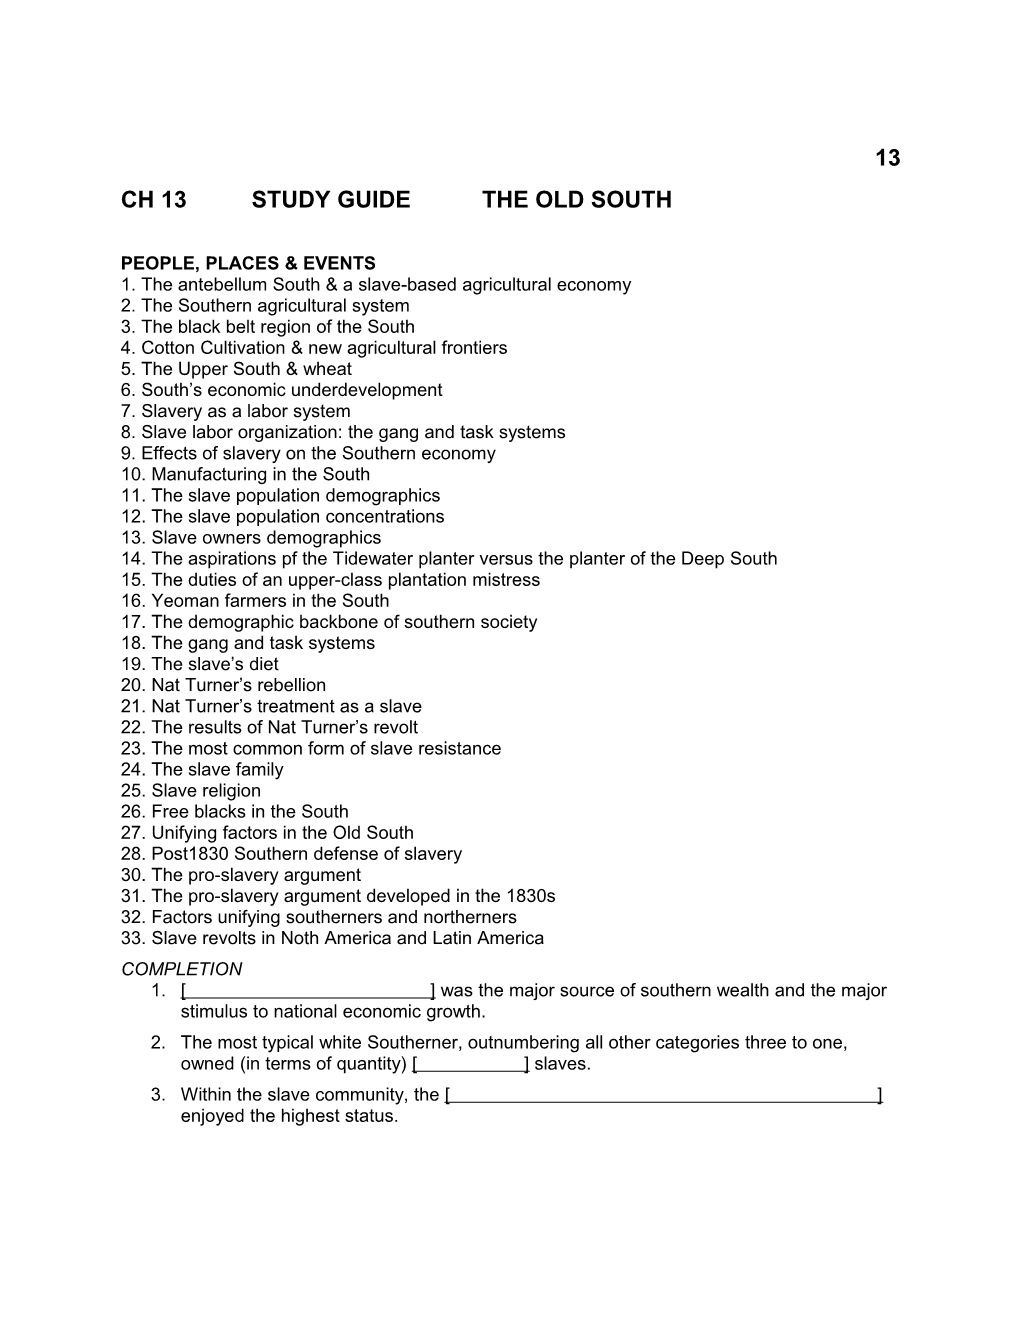 CH 13 STUDY GUIDE the Old South